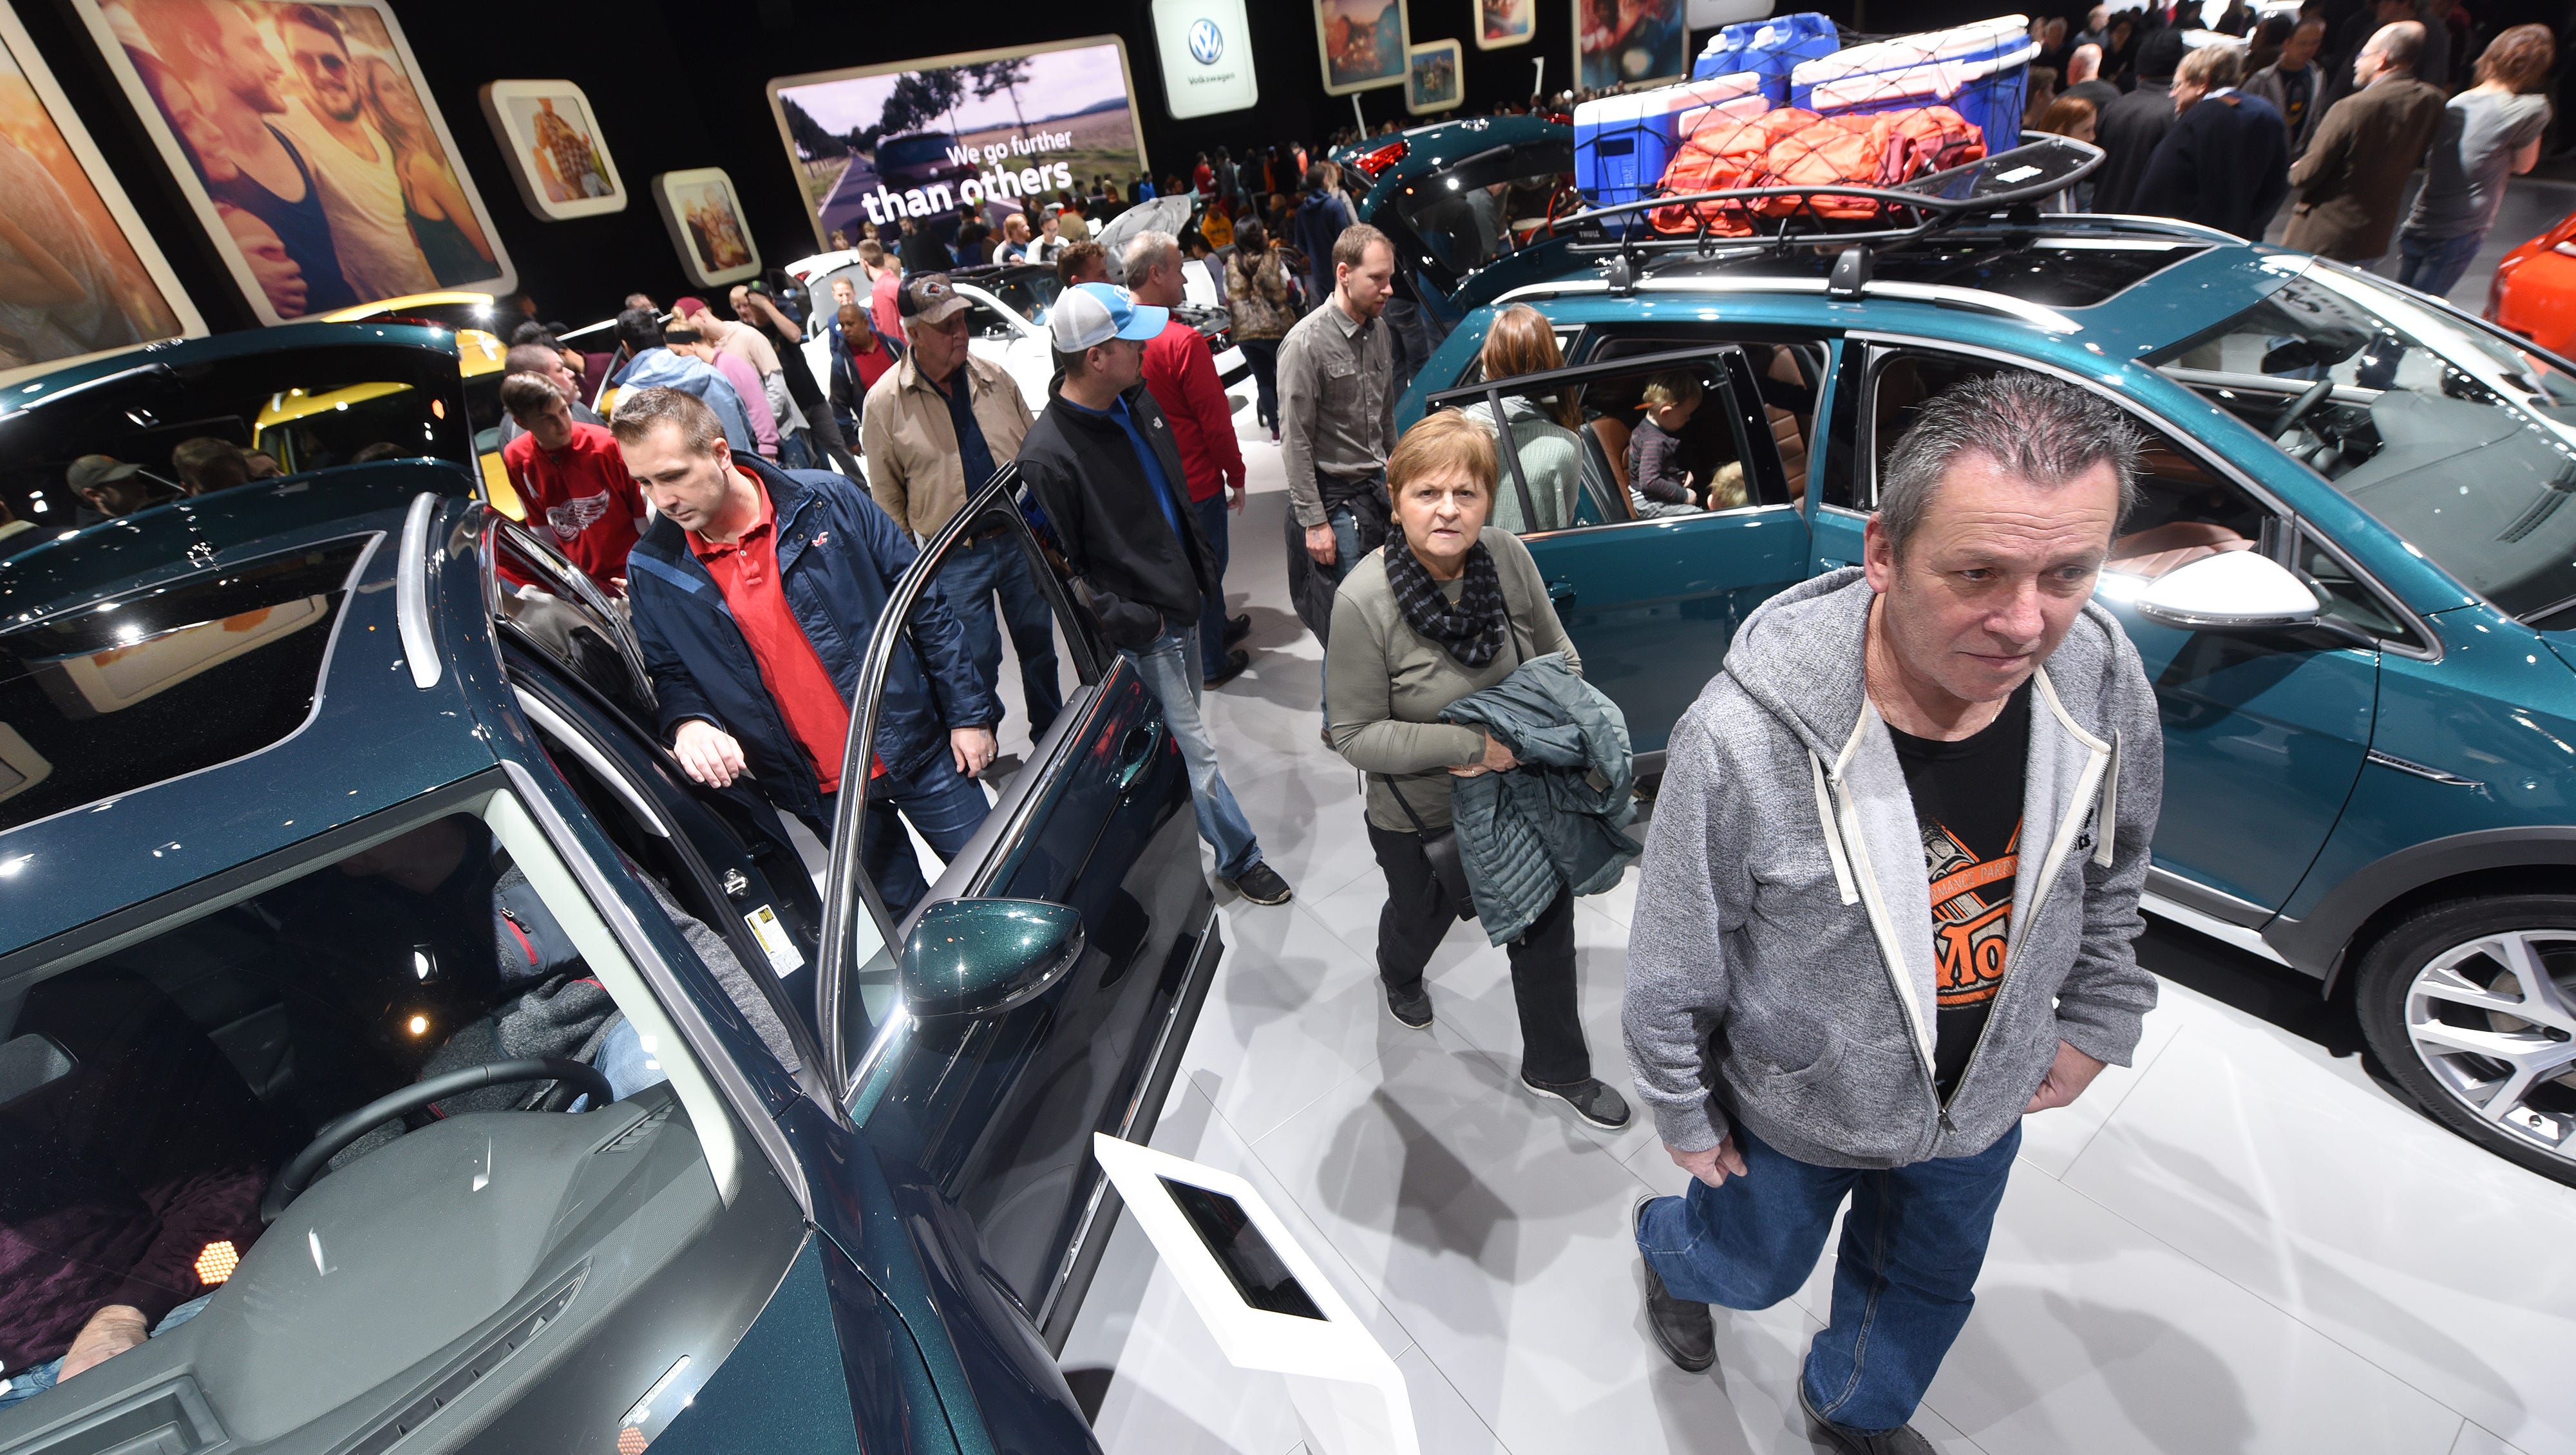 People fill Cobo Center on Saturday January 20, 2018 at the VW display for the first public day for the North American International Auto Show